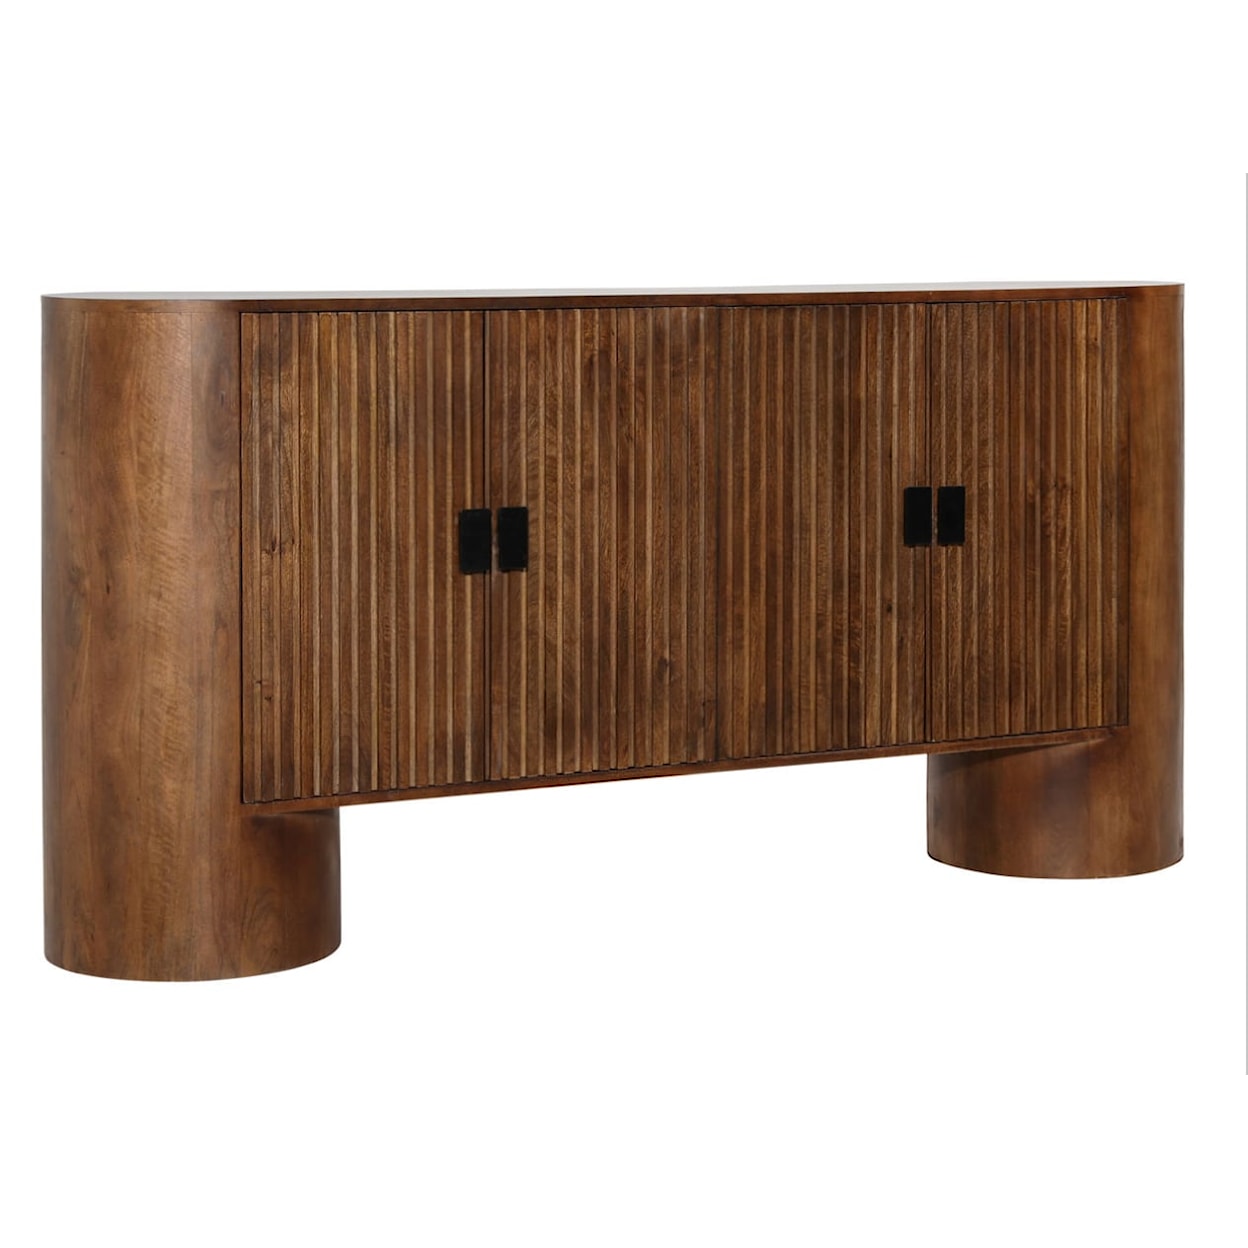 Dovetail Furniture Casegood Accent Stephenson Sideboard